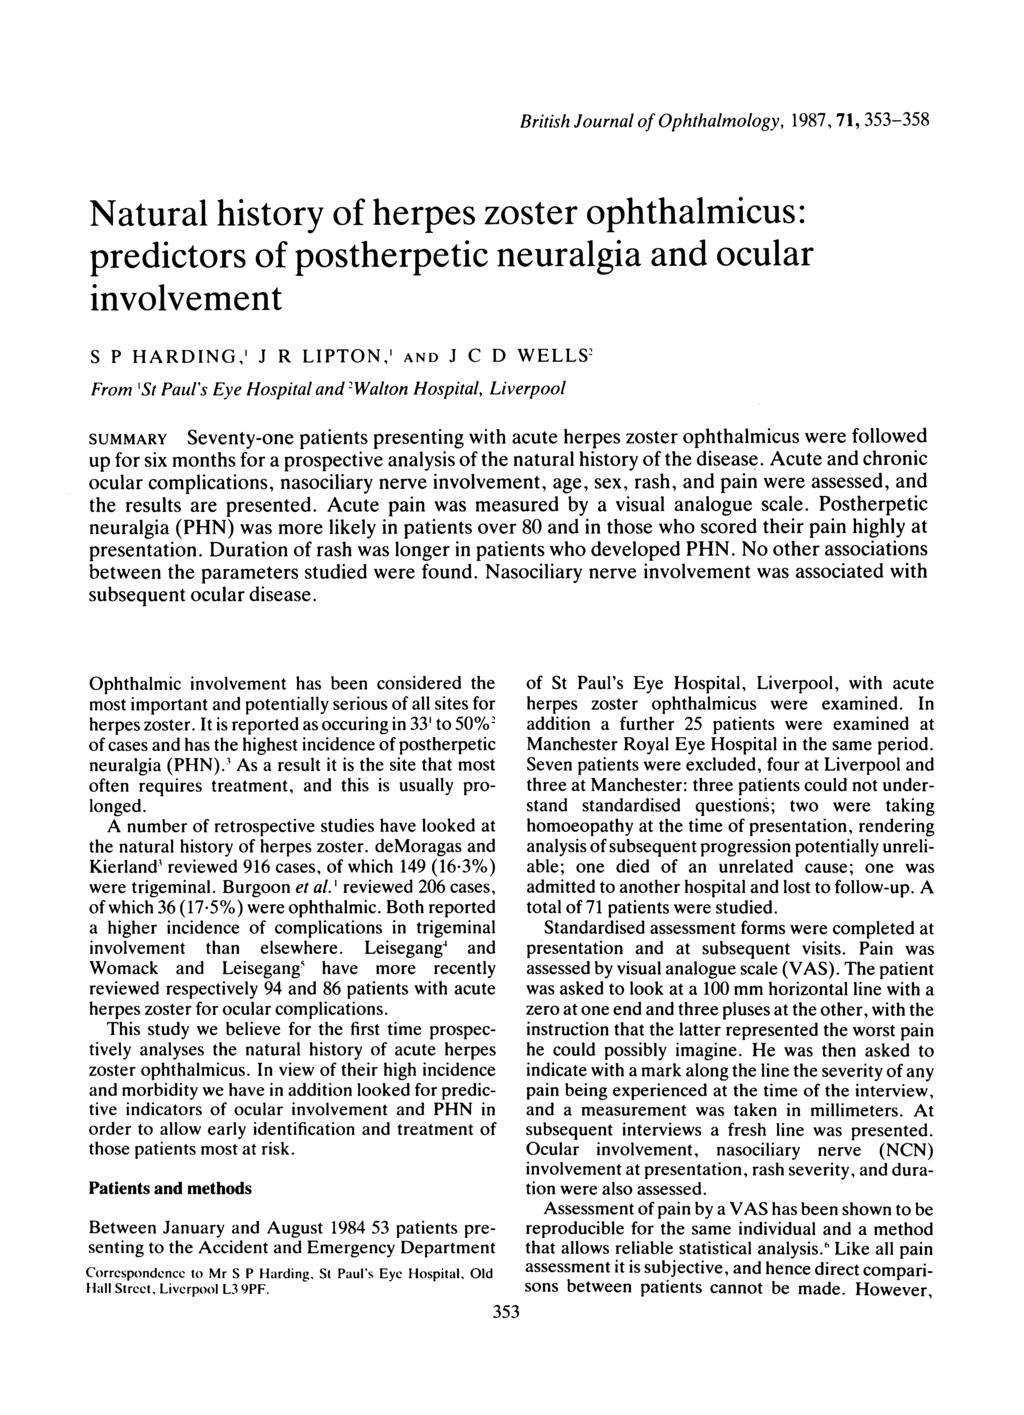 British Journal of Ophthalmology, 1987, 71, 353-358 Natural history of herpes zoster ophthalmicus: predictors of postherpetic neuralgia and ocular involvement S P HARDNG,' J R LPTON,' AND J C D